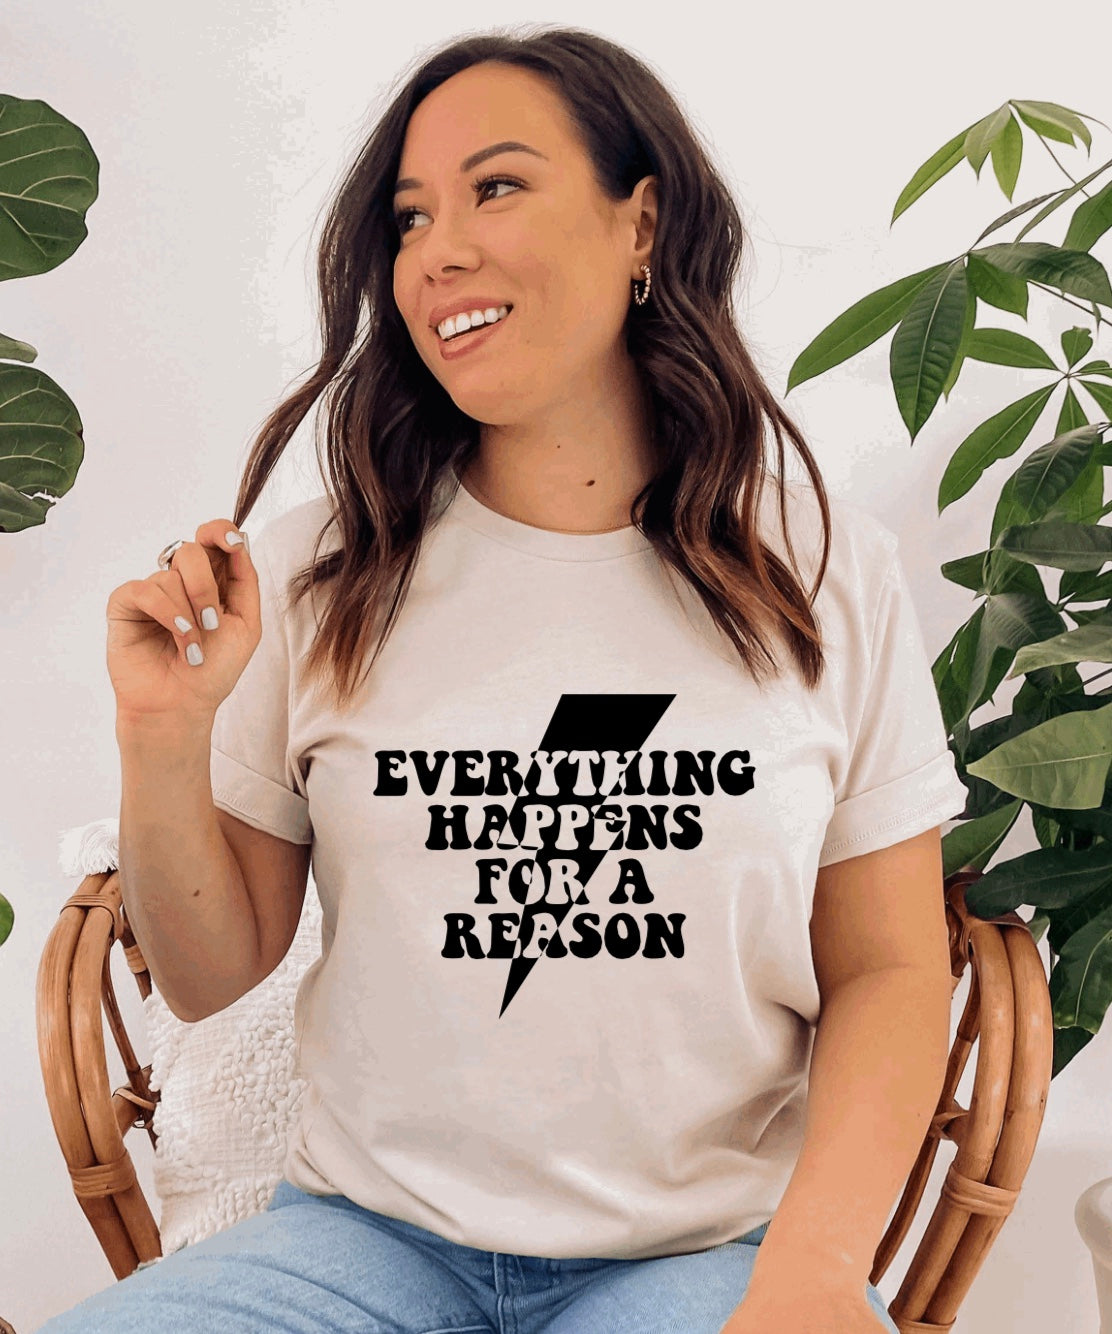 Everything happens for a reason t-shirt